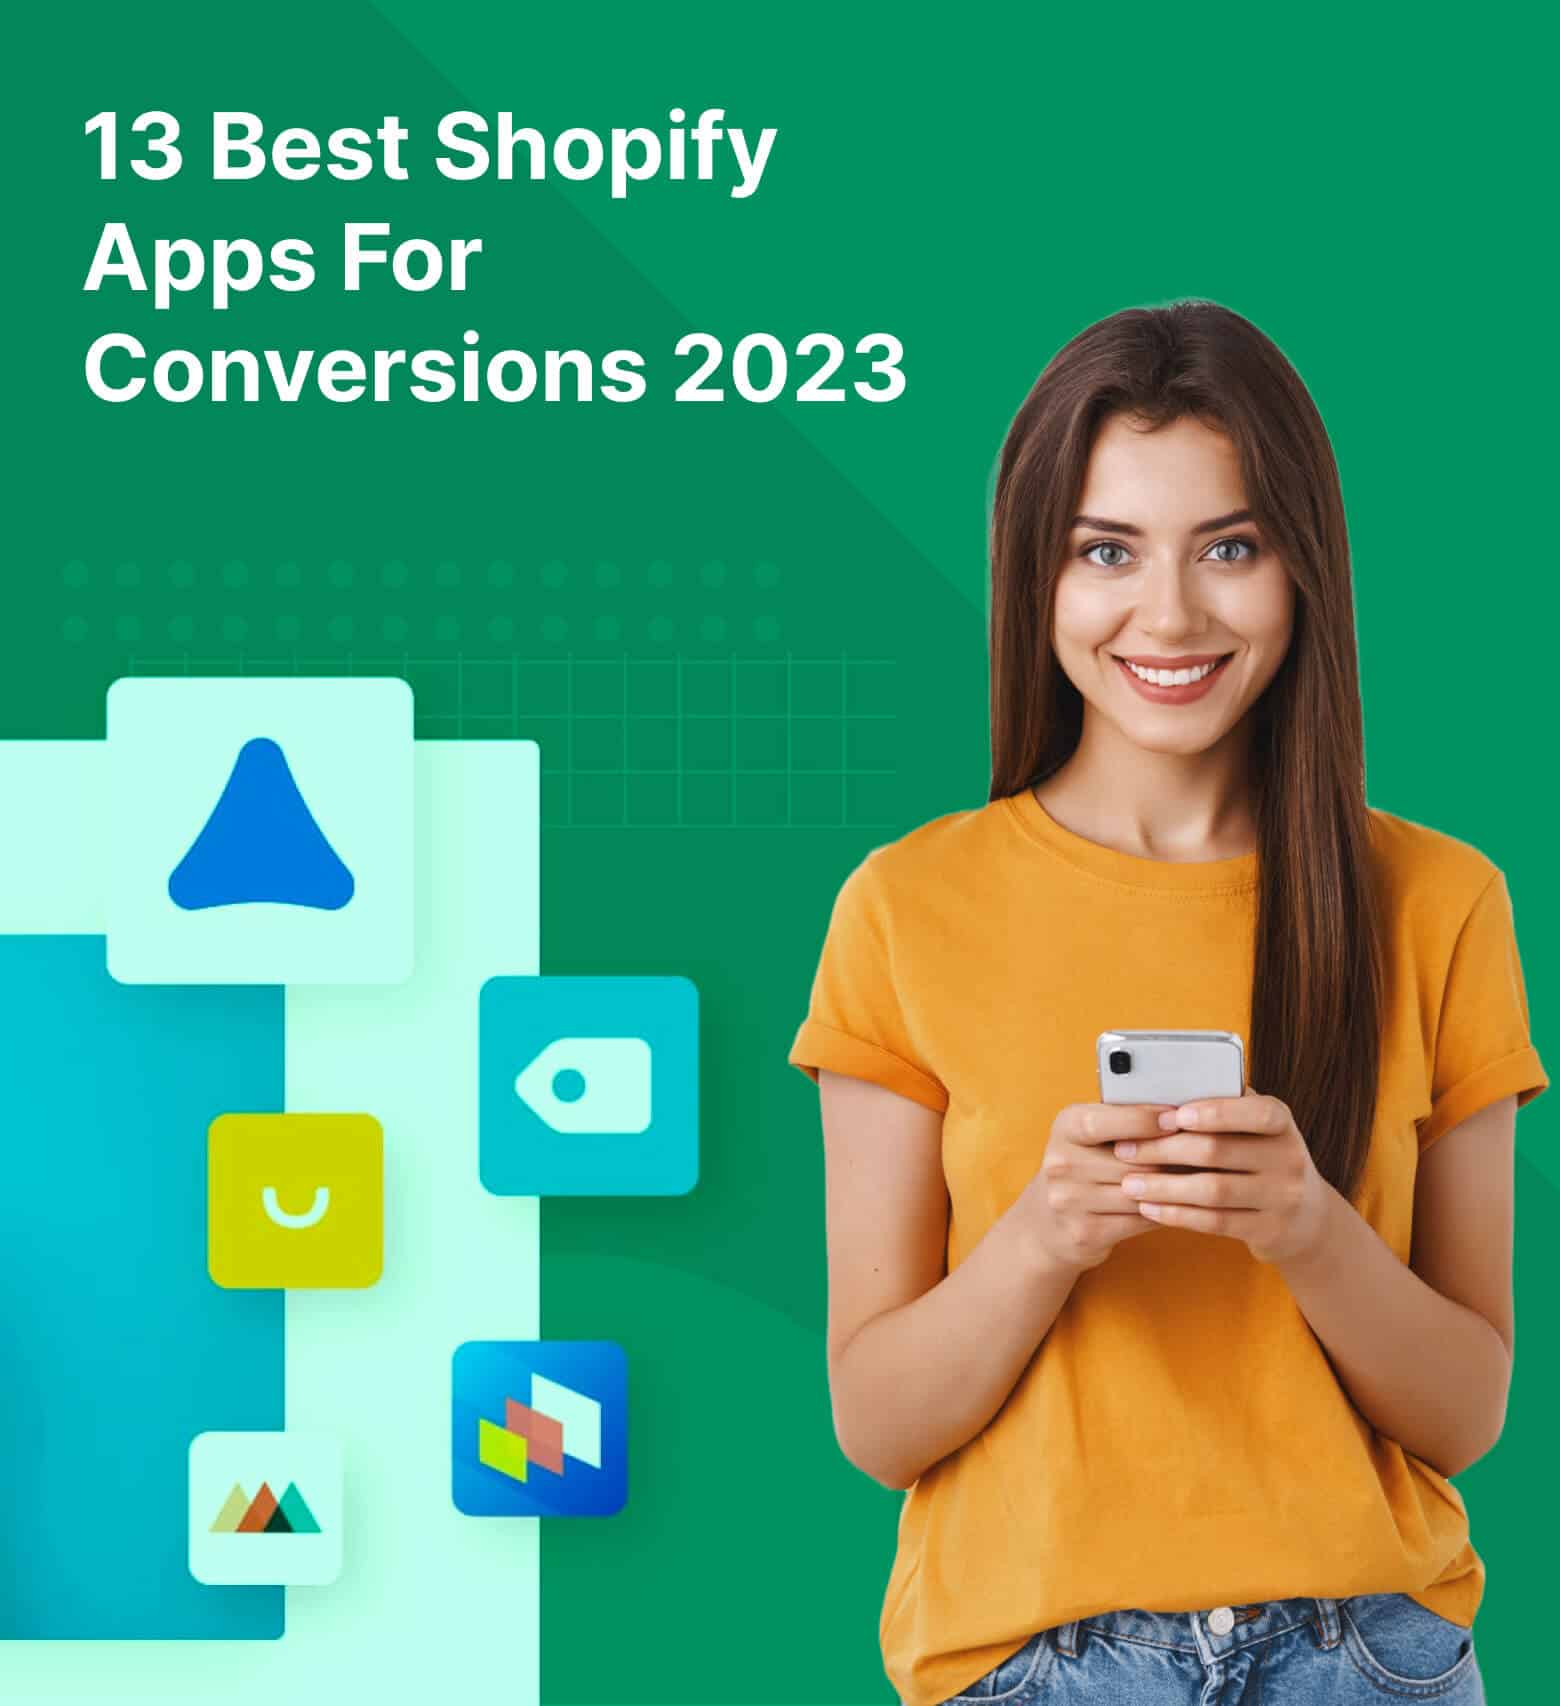 13 Best Shopify Apps For Conversions